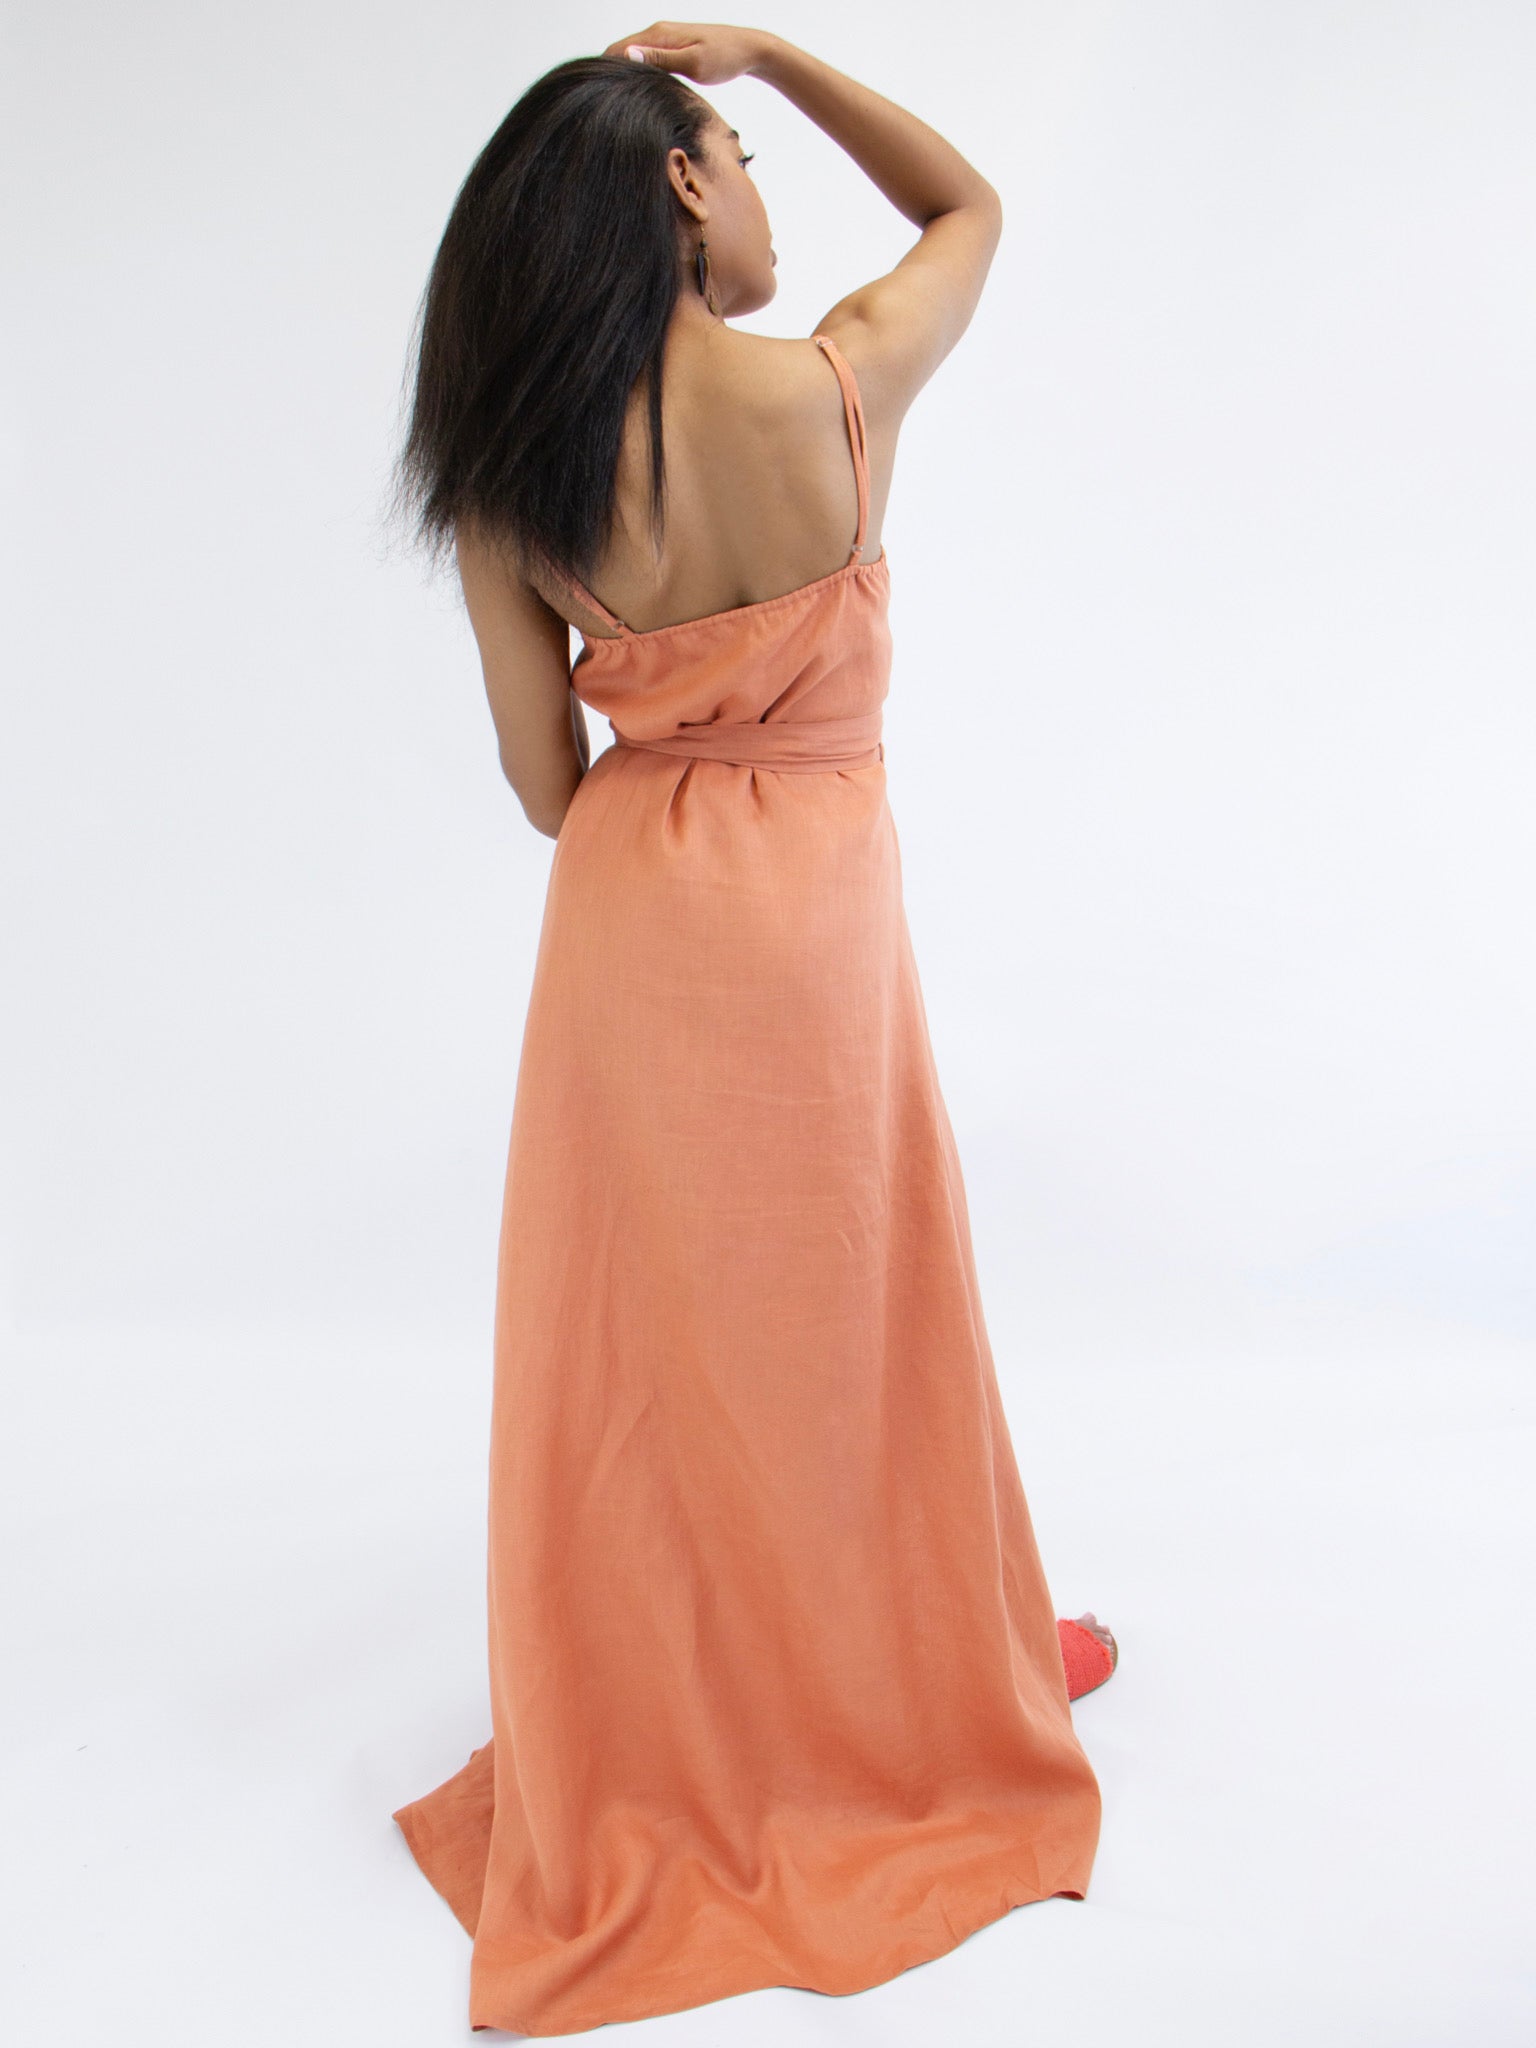 Coco Point Wrap Dress in Marmalade